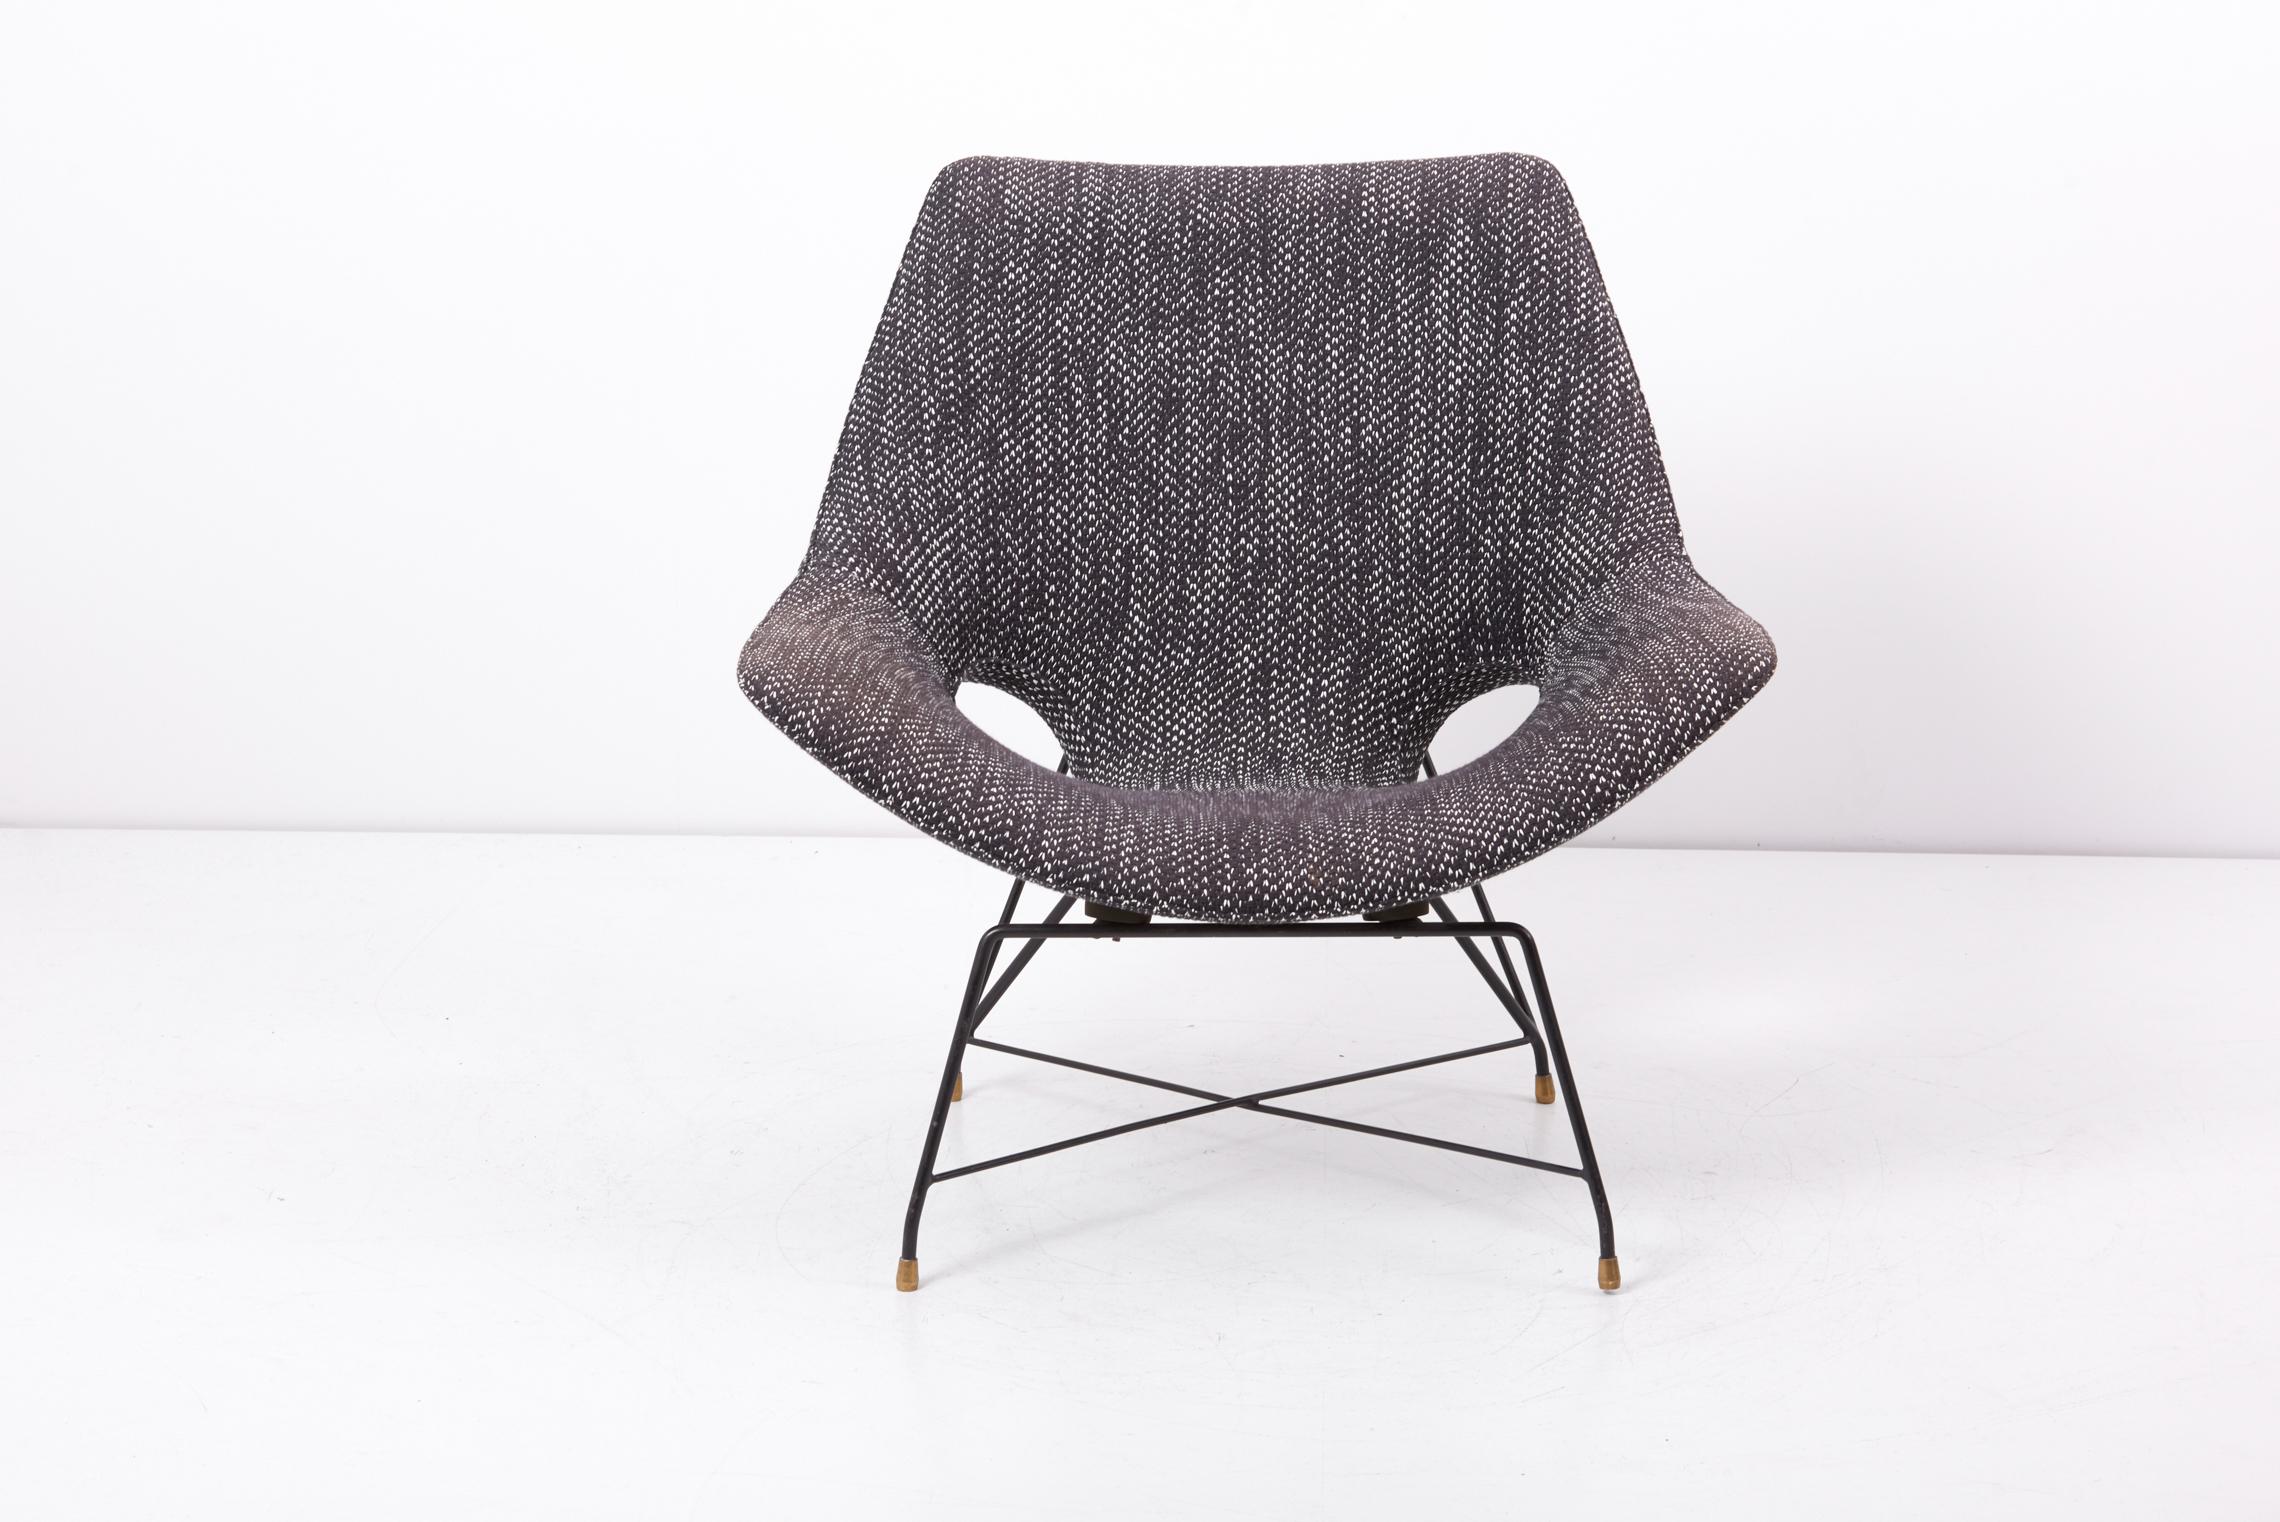 Lounge chair, designed in 1950s by Augusto Bozzi and manufactured by Saporiti in Italy.
Metal frame with brass ends, wool fabric in black and white.